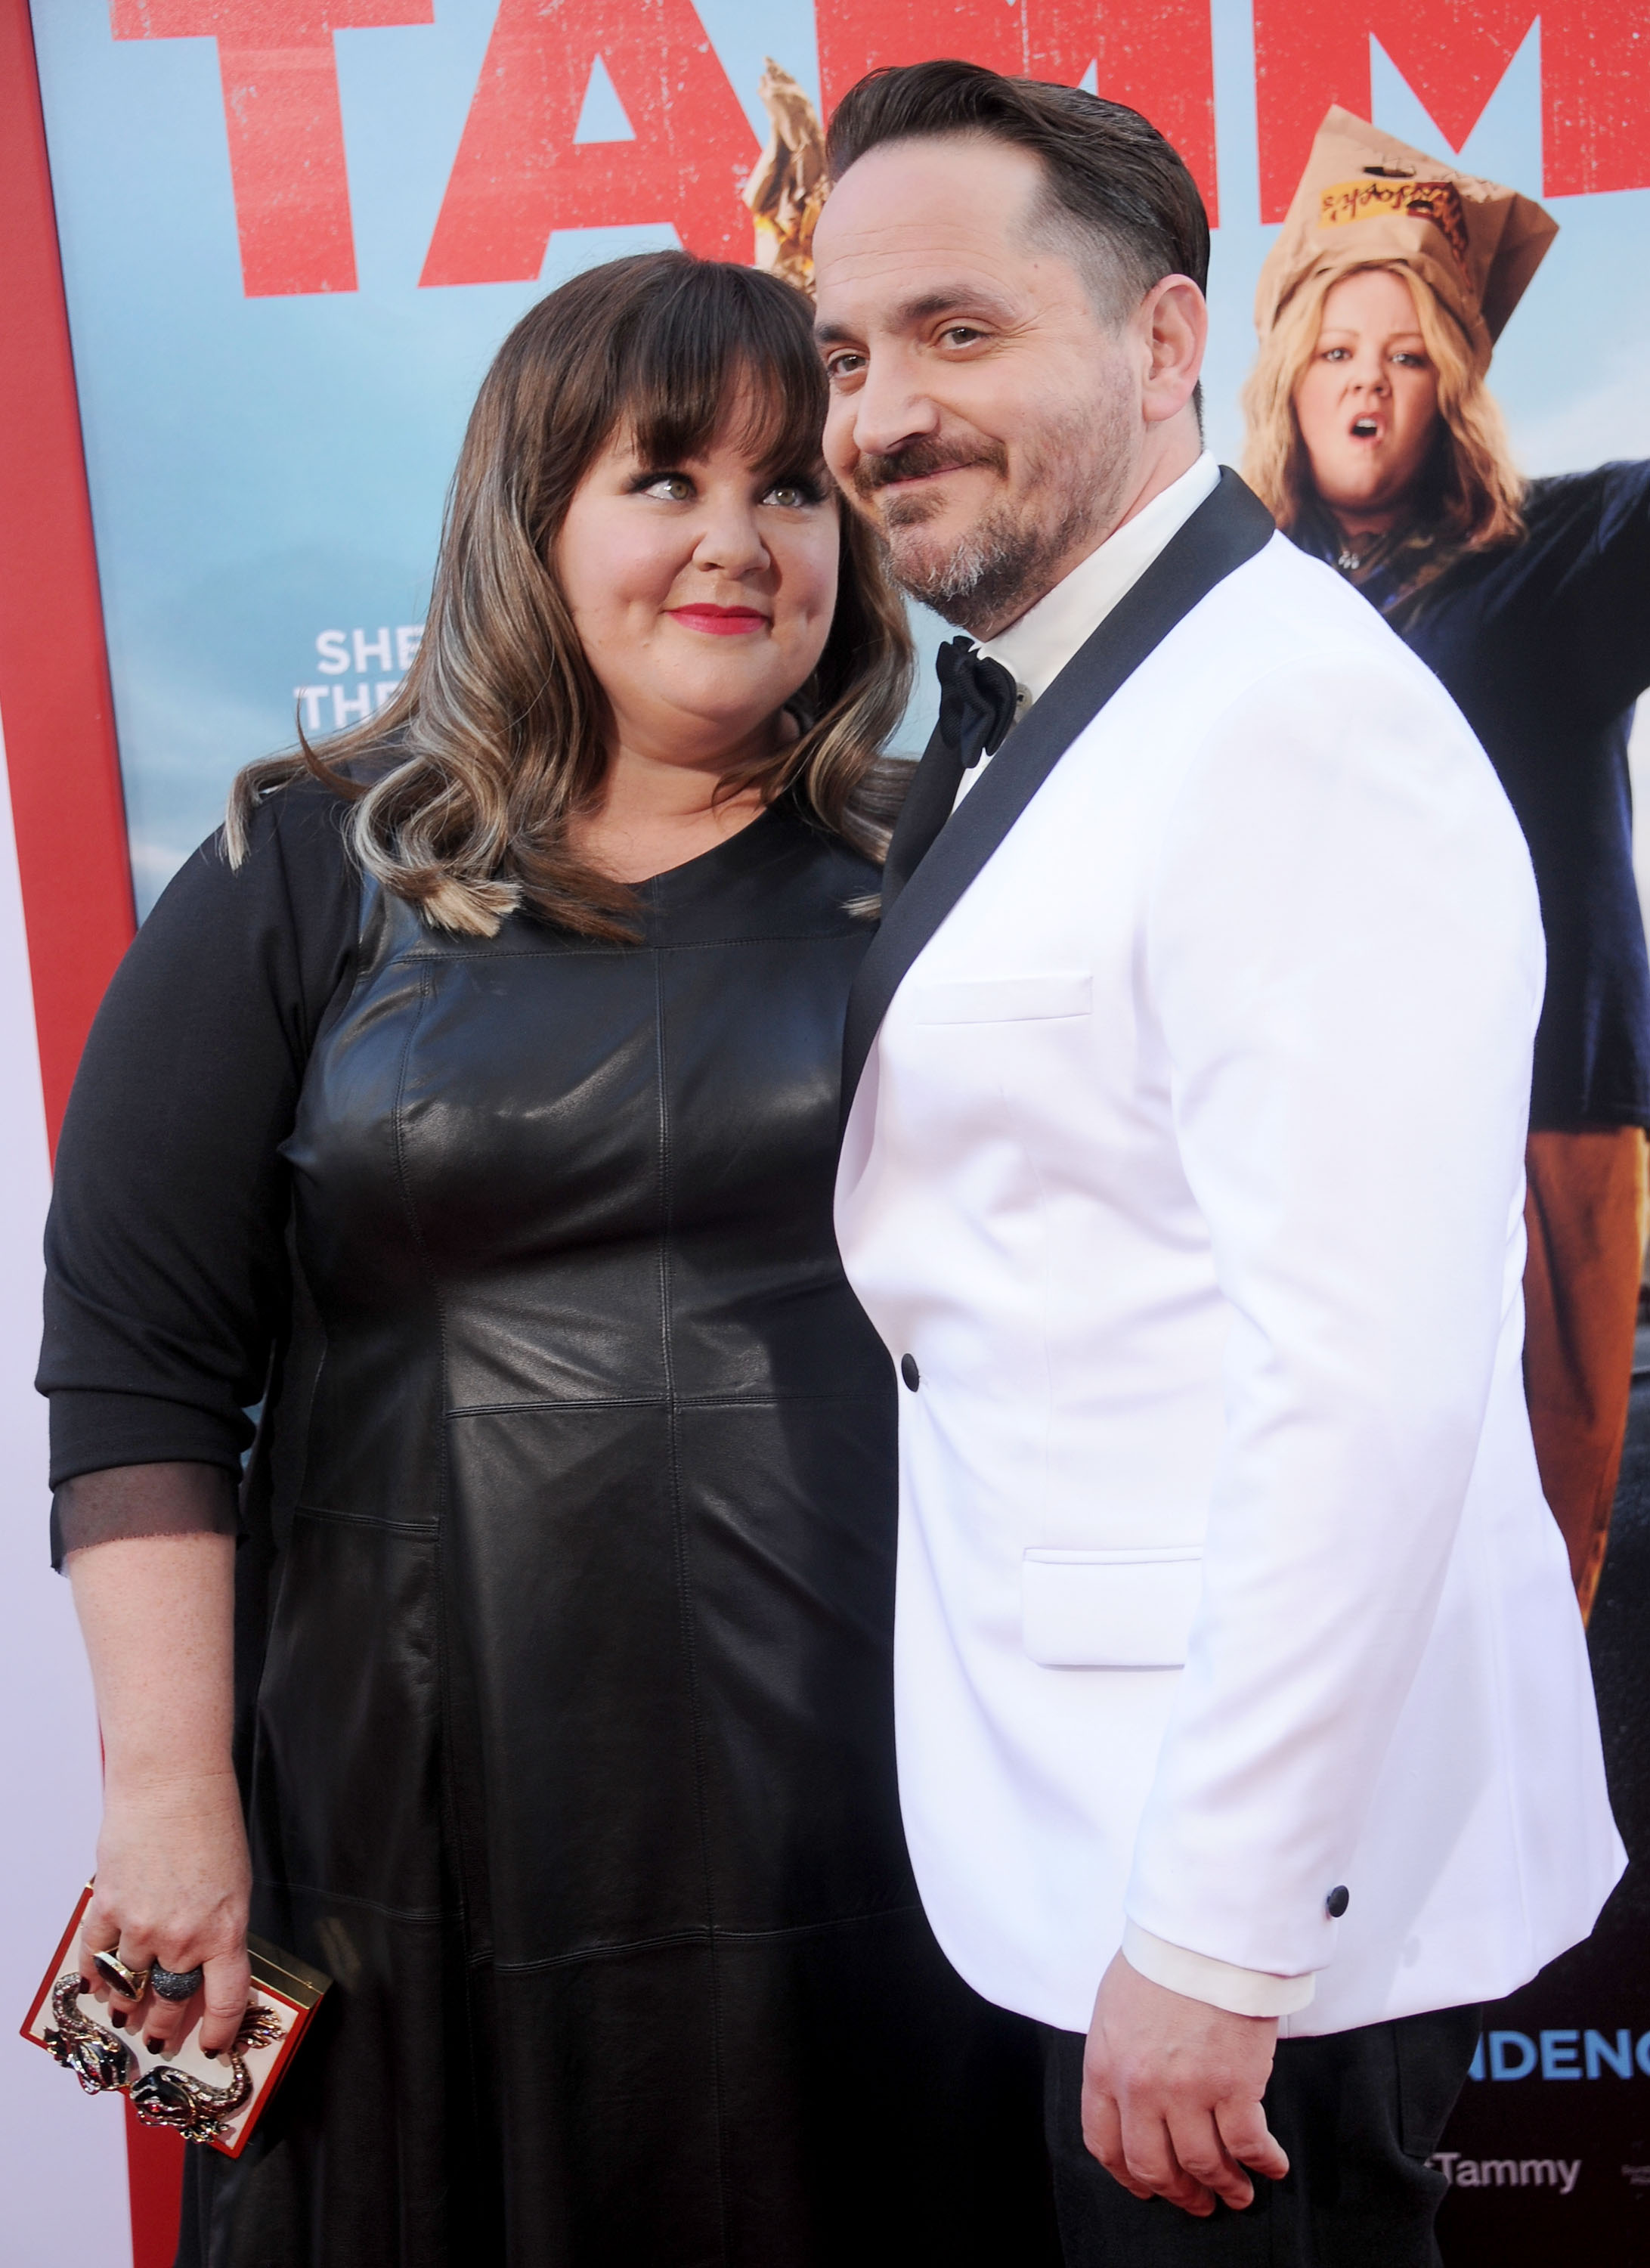 Actors Melissa McCarthy and husband Ben Falcone arrive at the premiere of "Tammy" at TCL Chinese Theatre on June 30, 2014, in Hollywood, California. | Source: Getty Images